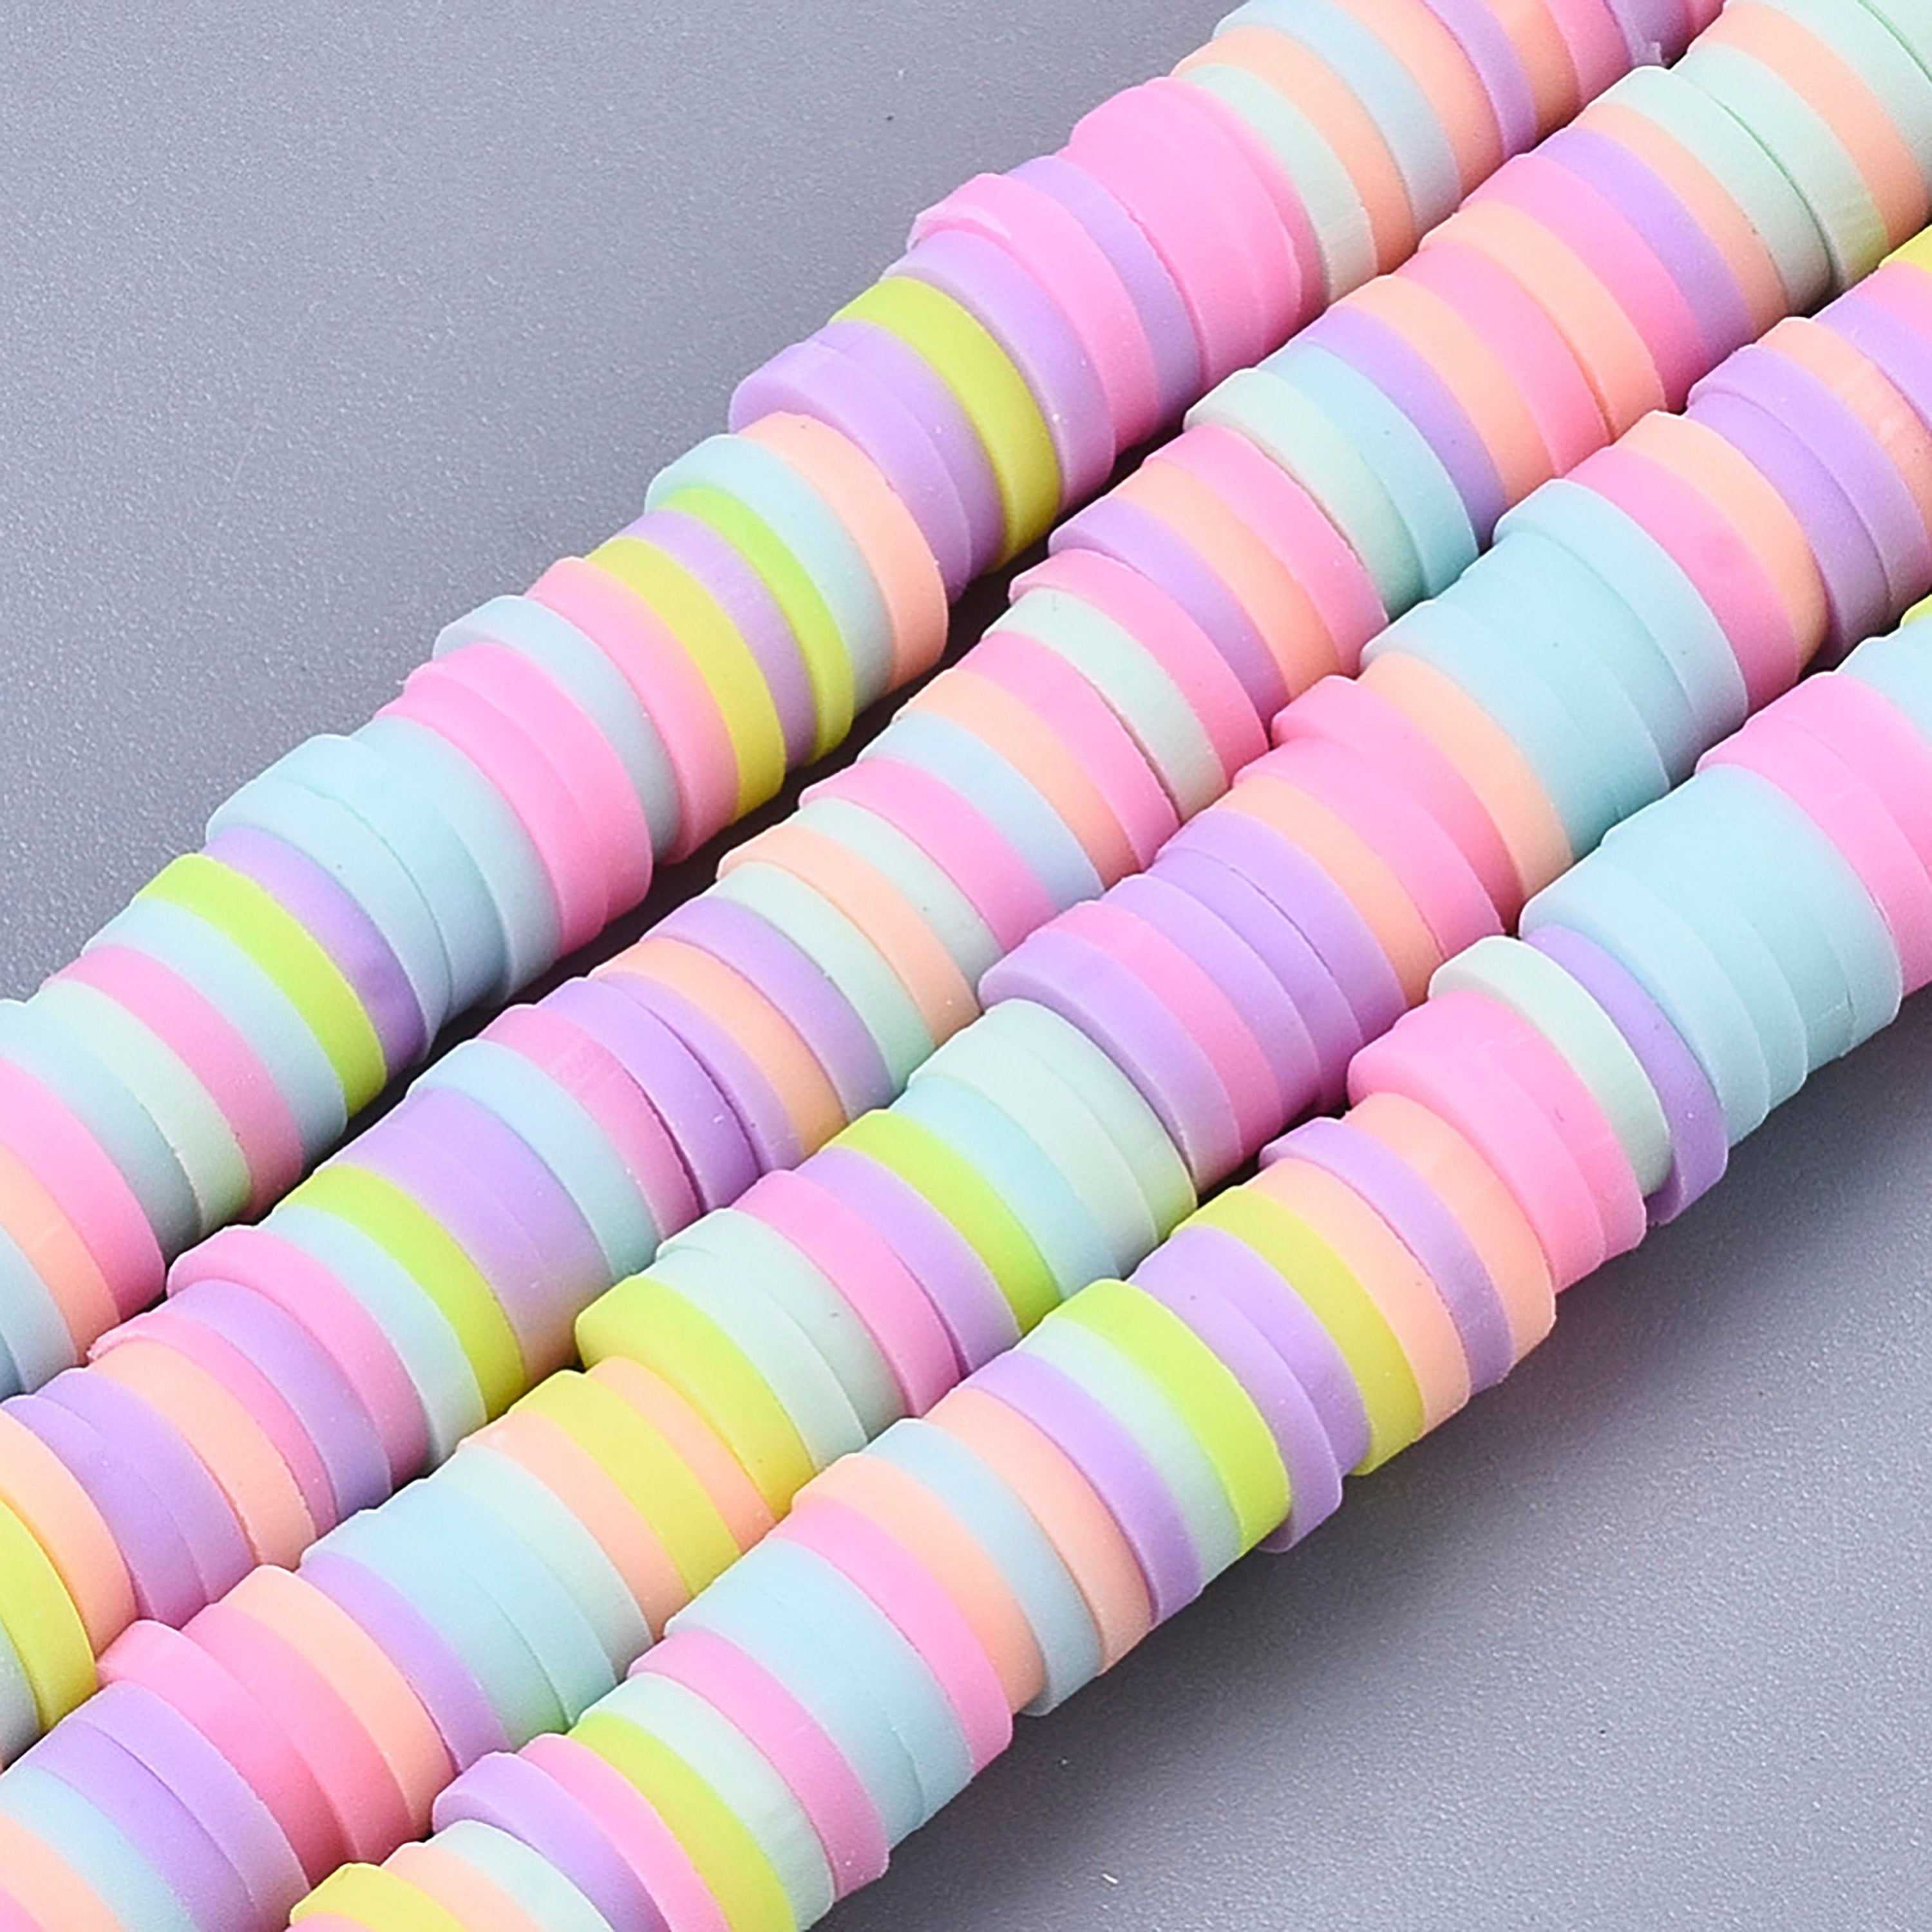 1 Strand, 6mm, Heishi Beads, Environmental Handmade Polymer Clay Beads,  Disc/Flat Round in pastel shades